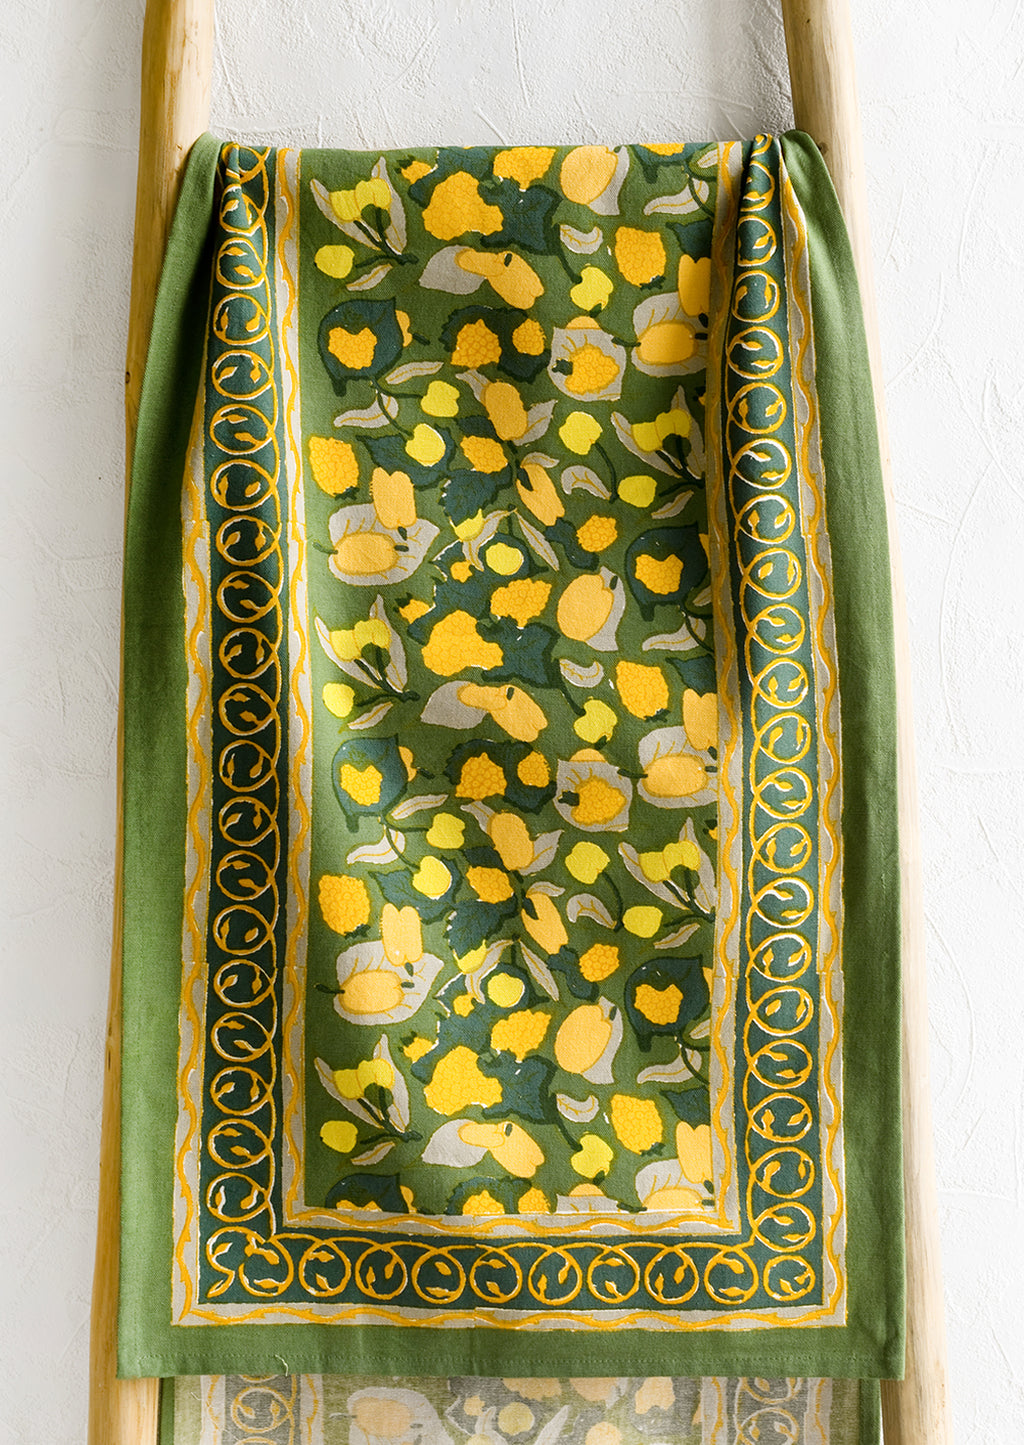 1: A block printed table runner in green and yellow print.